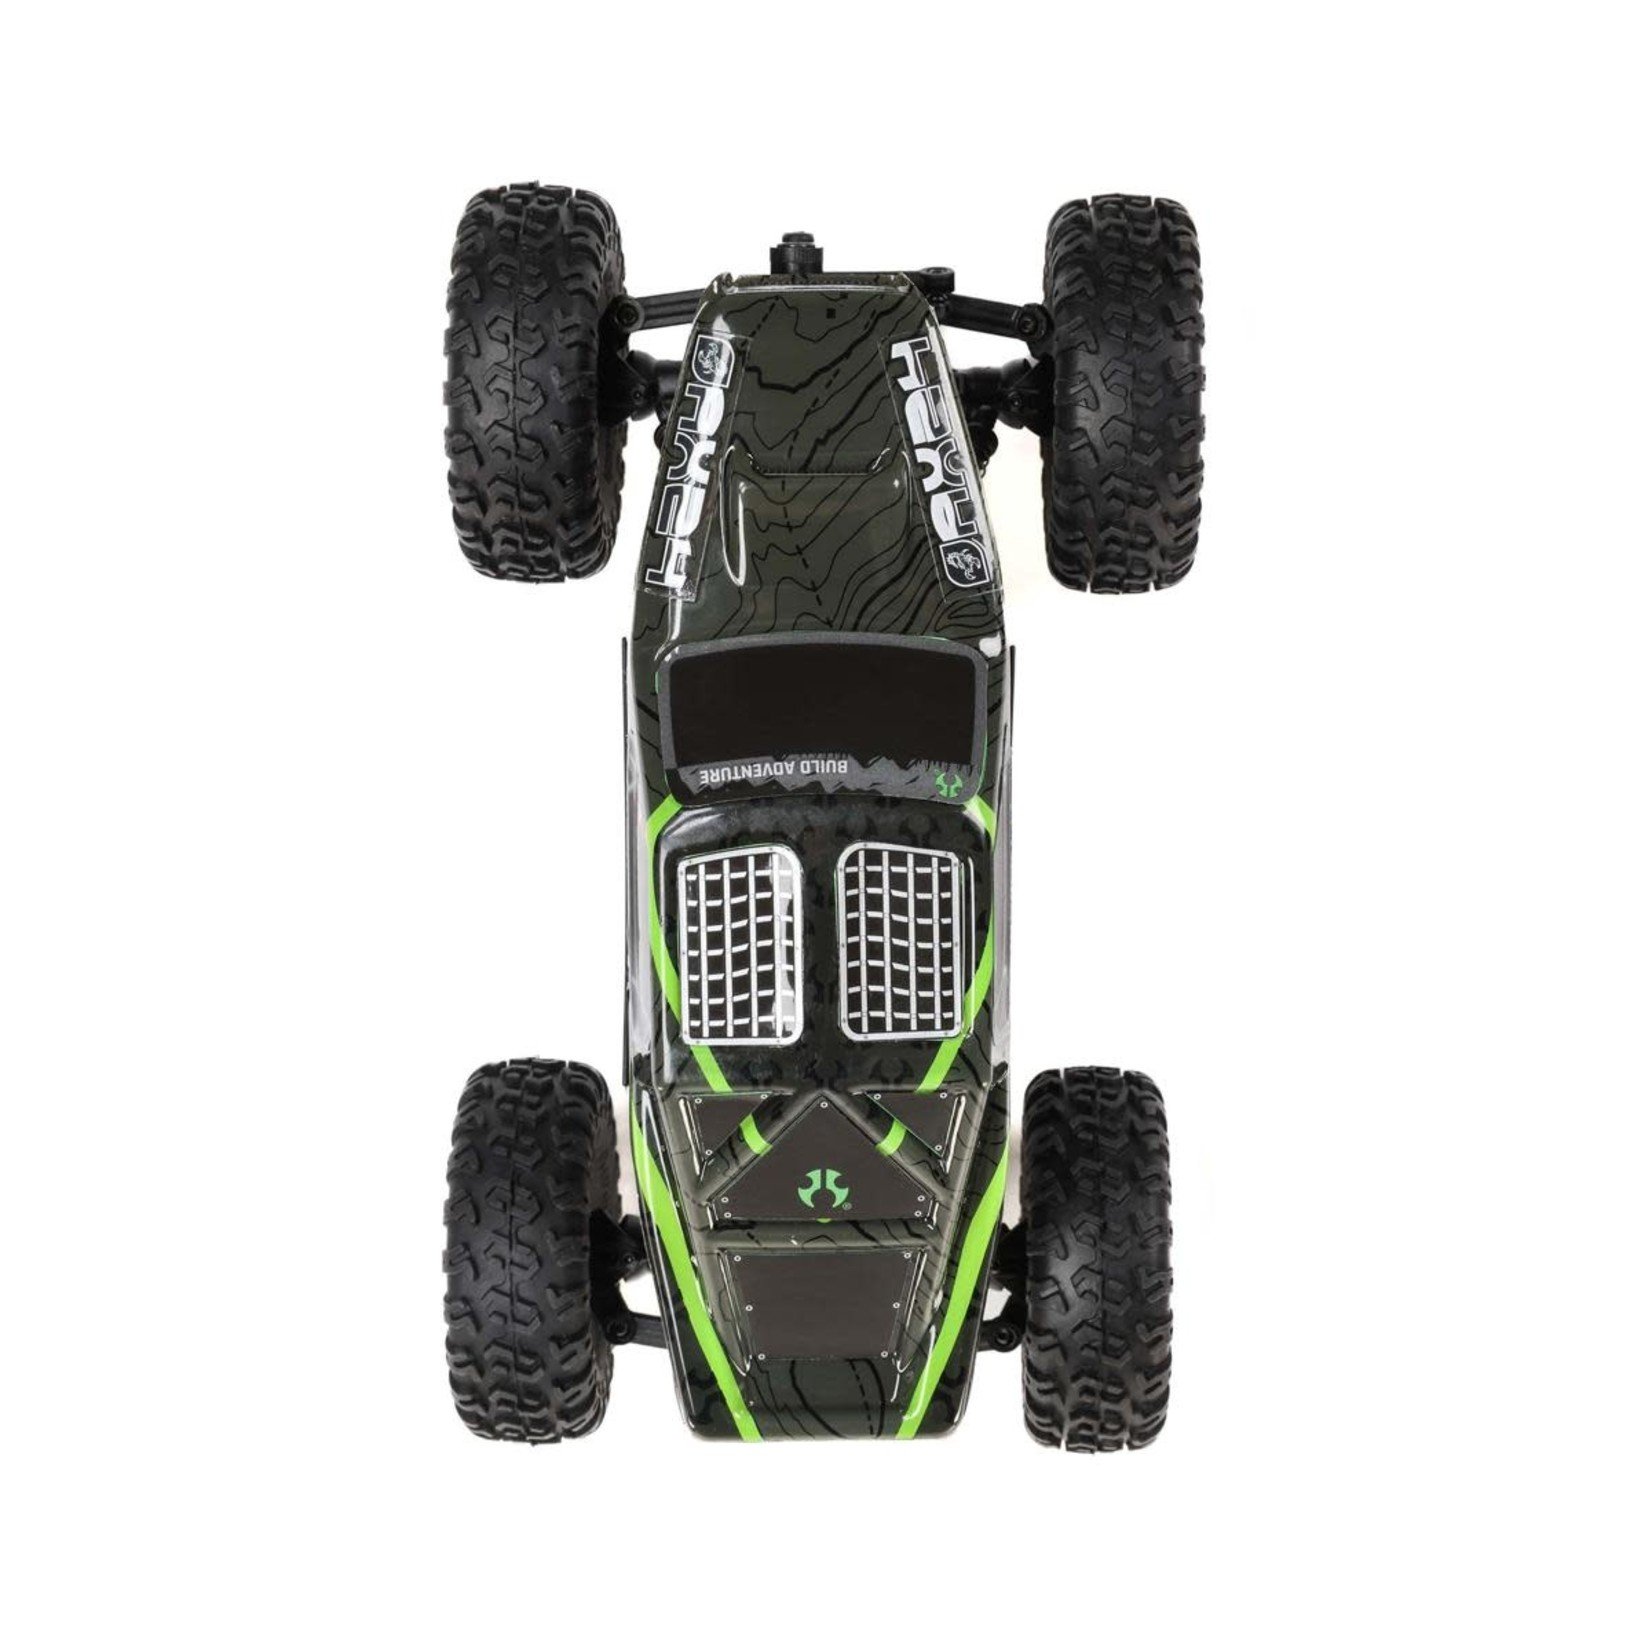 Axial Axial AX24 XC-1 1/24 4WD RTR 4WS Mini Crawler (Green) w/2.4GHz Radio, Battery & Charger #AXI00003T1